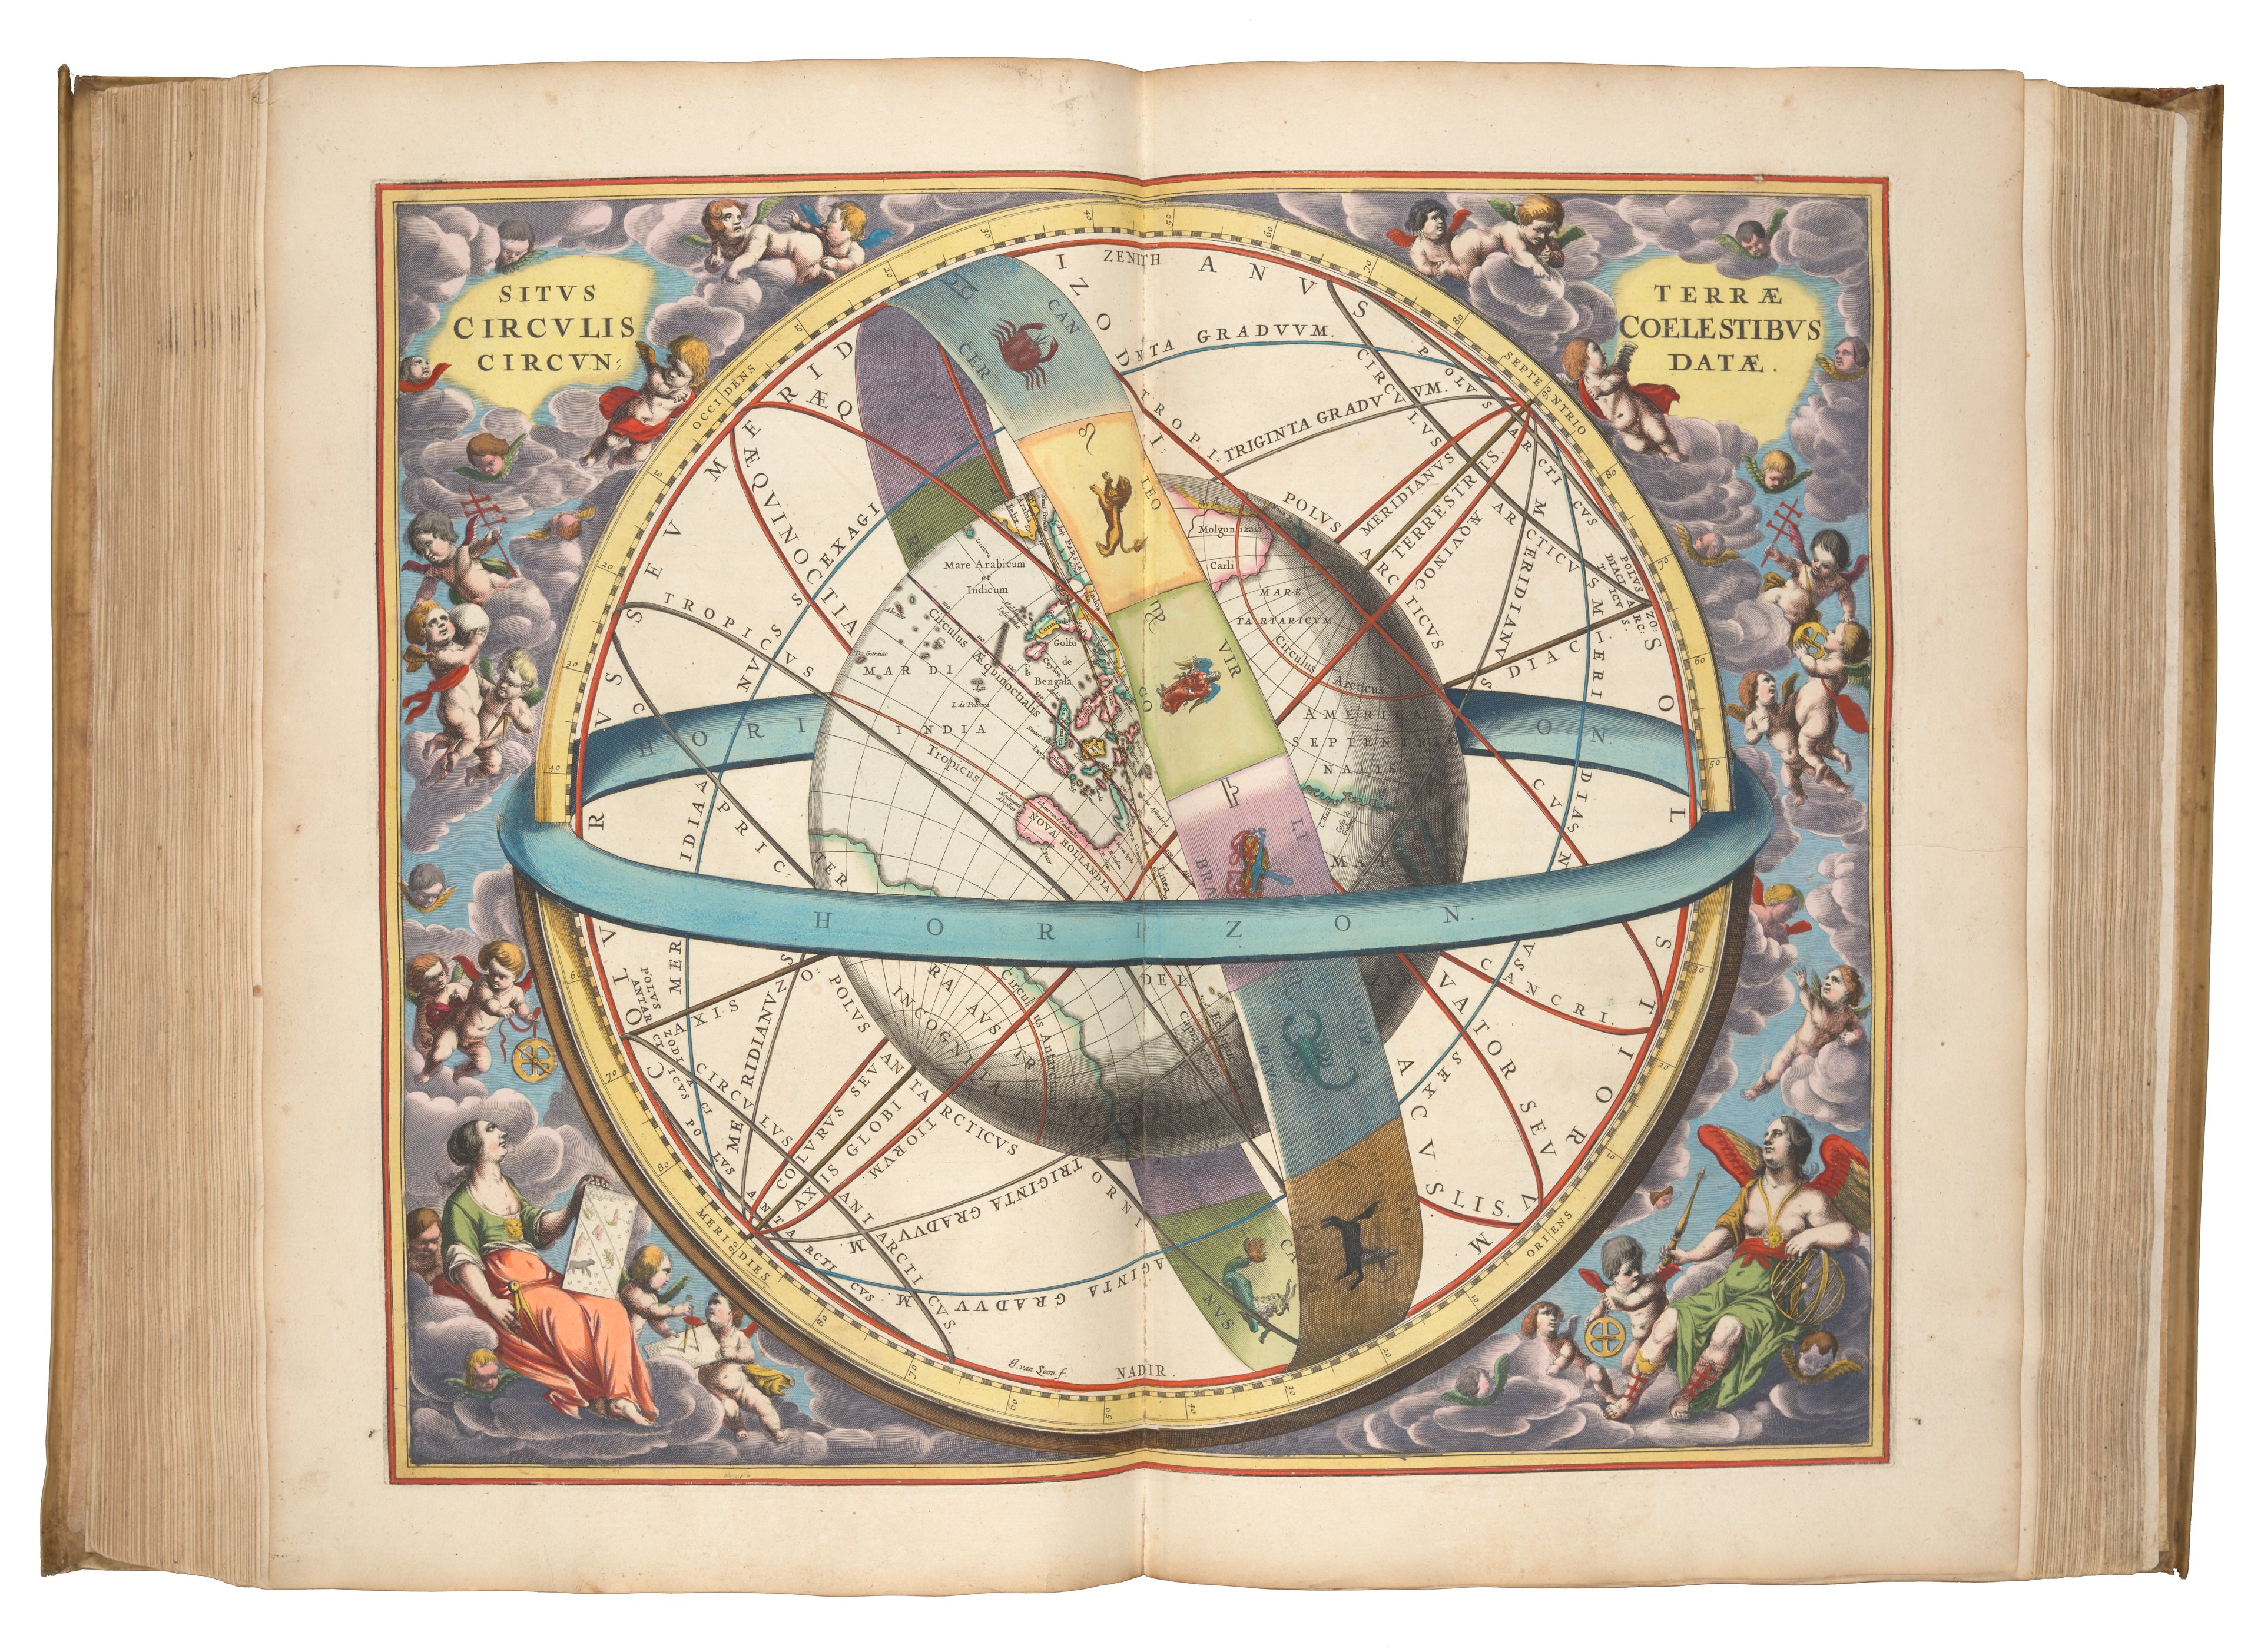 A coloured, copperplate illustration of the Earth surrounded by clouds and cherubs. A band of the Zodiac star signs is depicted around the middle of the Earth's sphere.